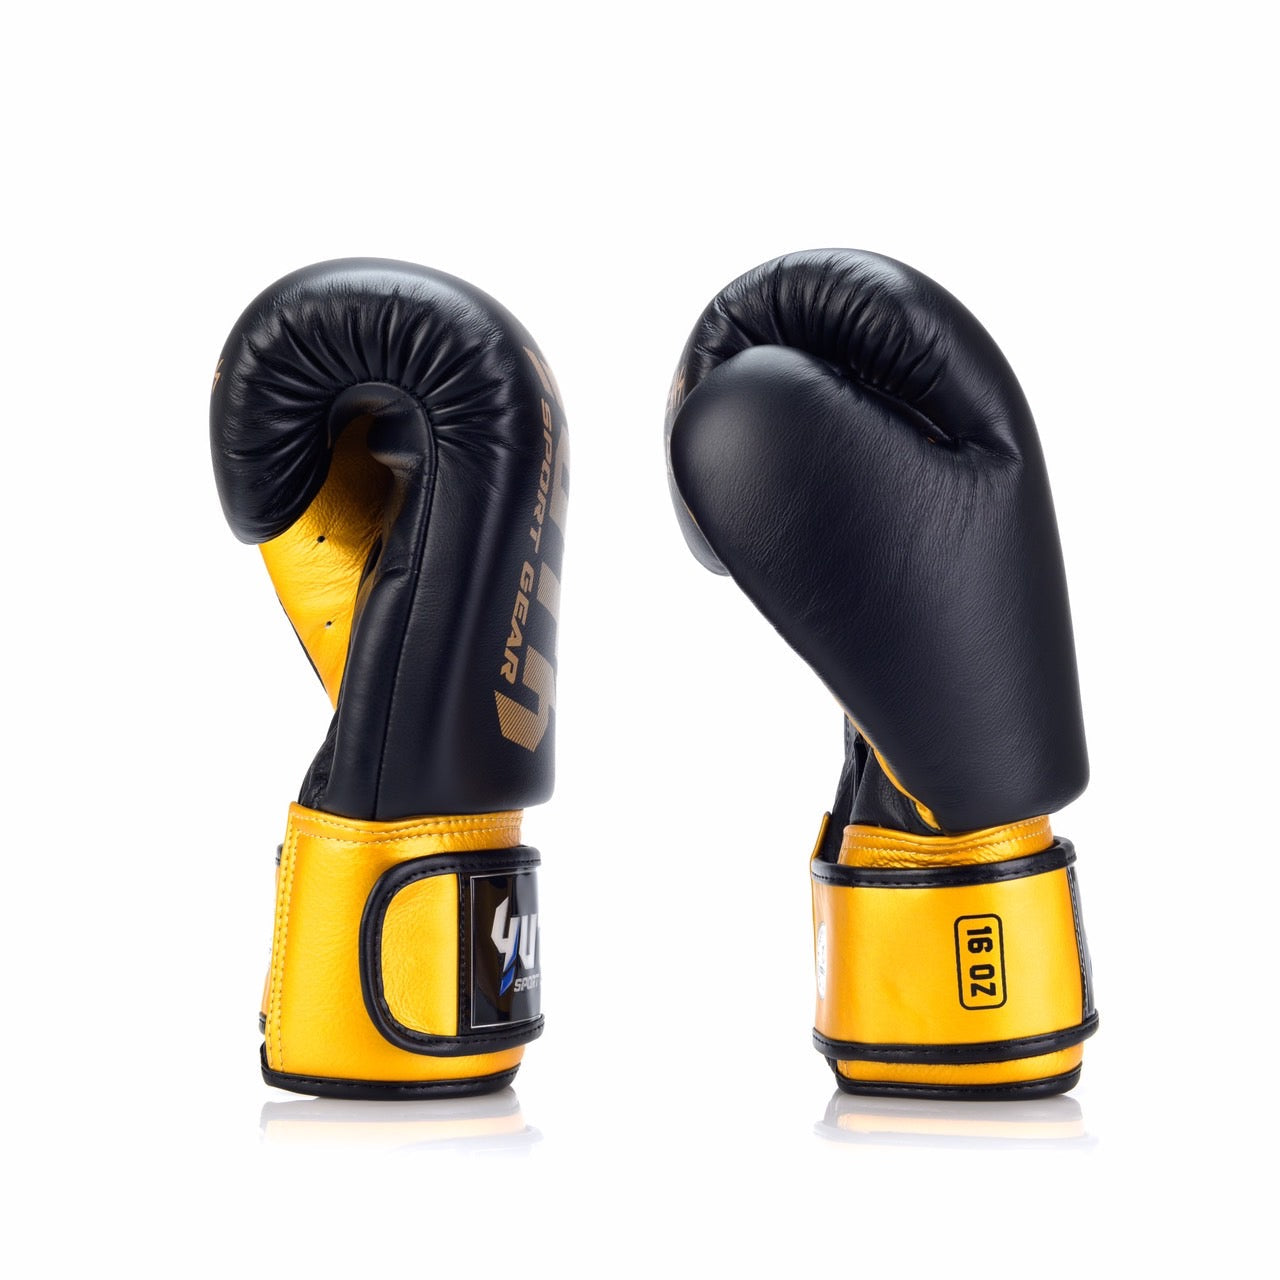 Yuth Boxing Gloves BGL20 Leather Black Gold